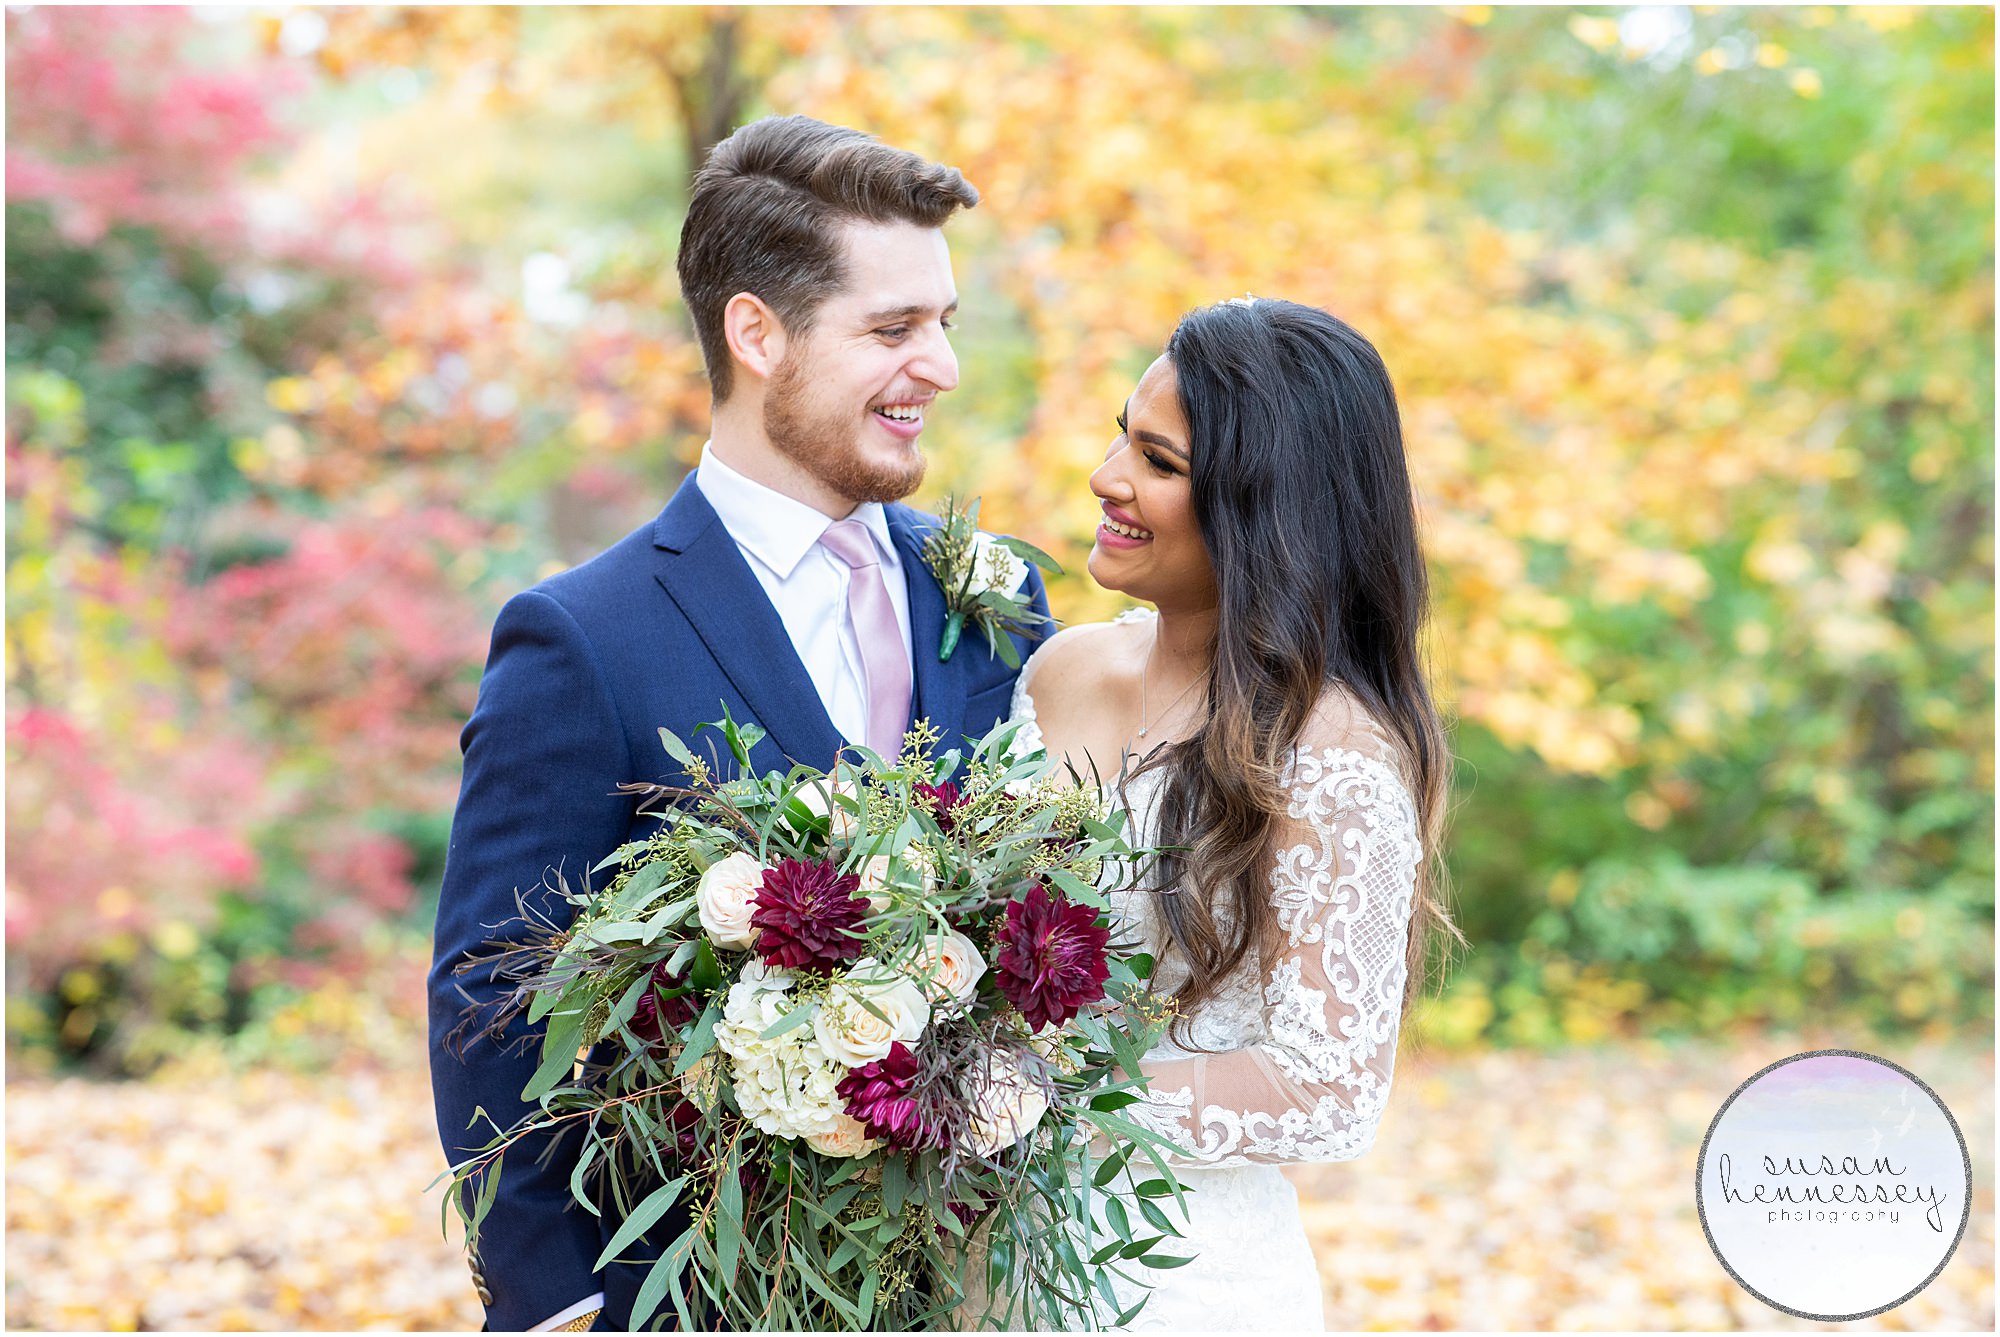 Fiza and Thomas had a South Jersey Microwedding with photos in Strawbridge Lake Park